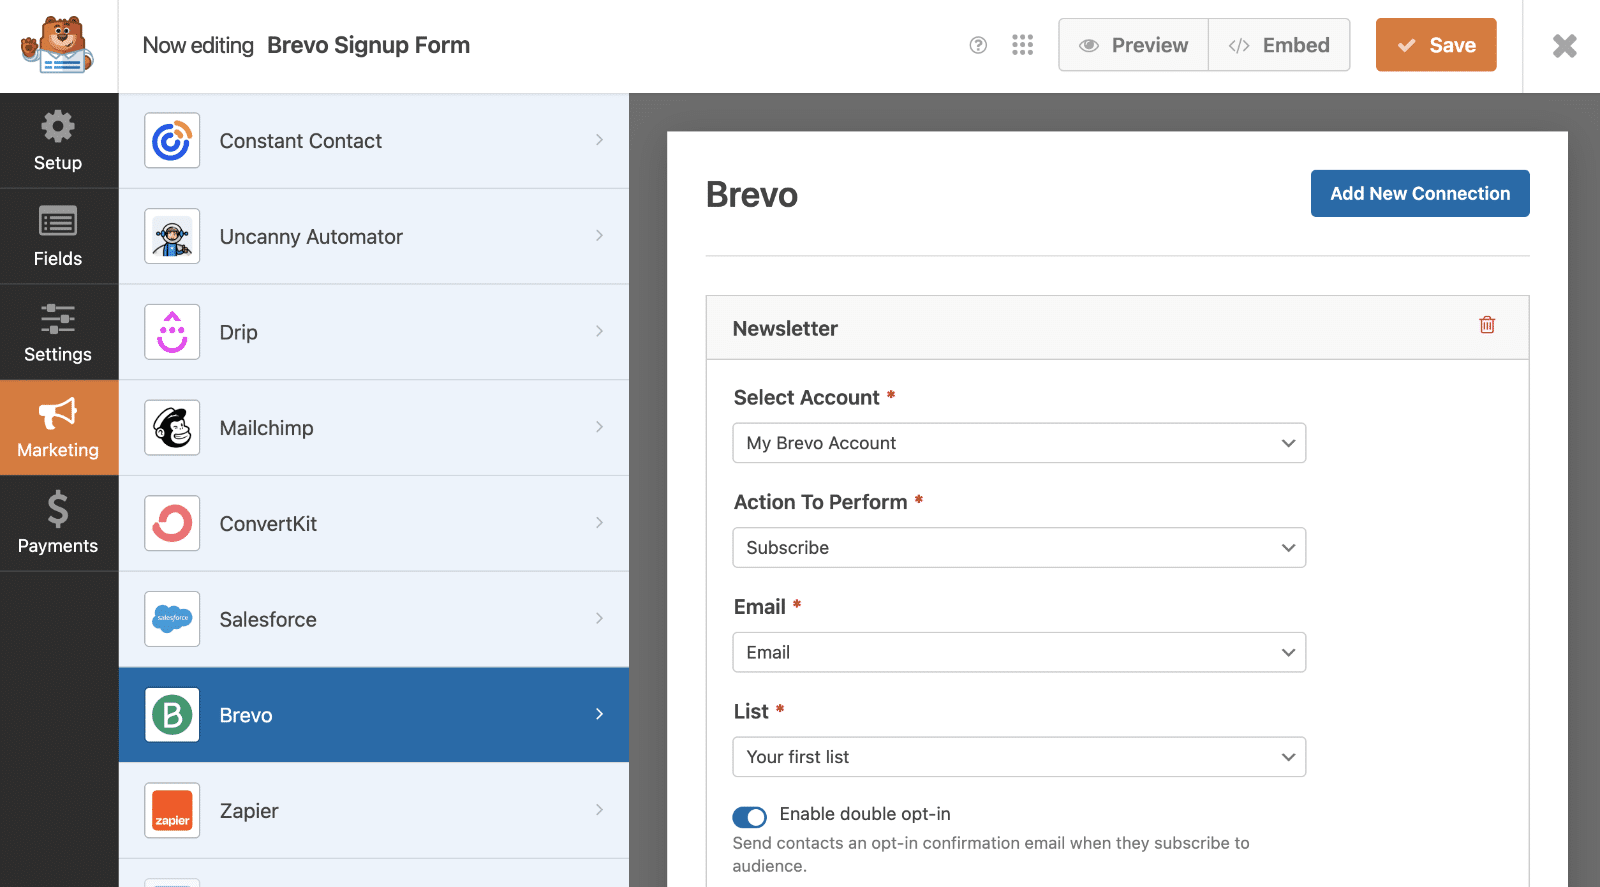 Connecting a form to Brevo in WPForms